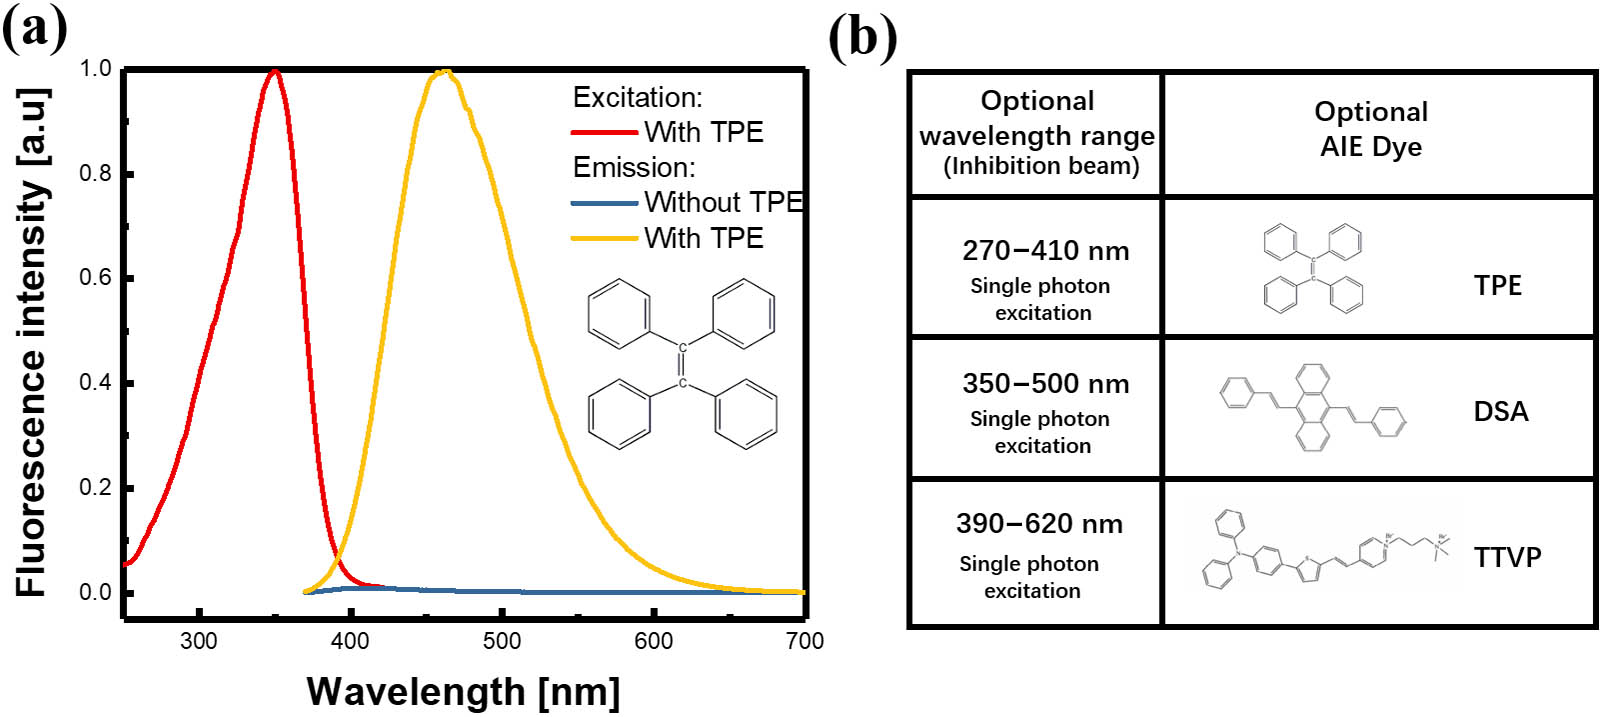 Fluorescent properties of AIE-induced dye resin sample with and without TPE. (a) Fluorescence spectra of dye resin sample with and without TPE, and both emission spectra are excited by the 370 nm laser. (b) Selection of AIE dyes with different inhibition beams.